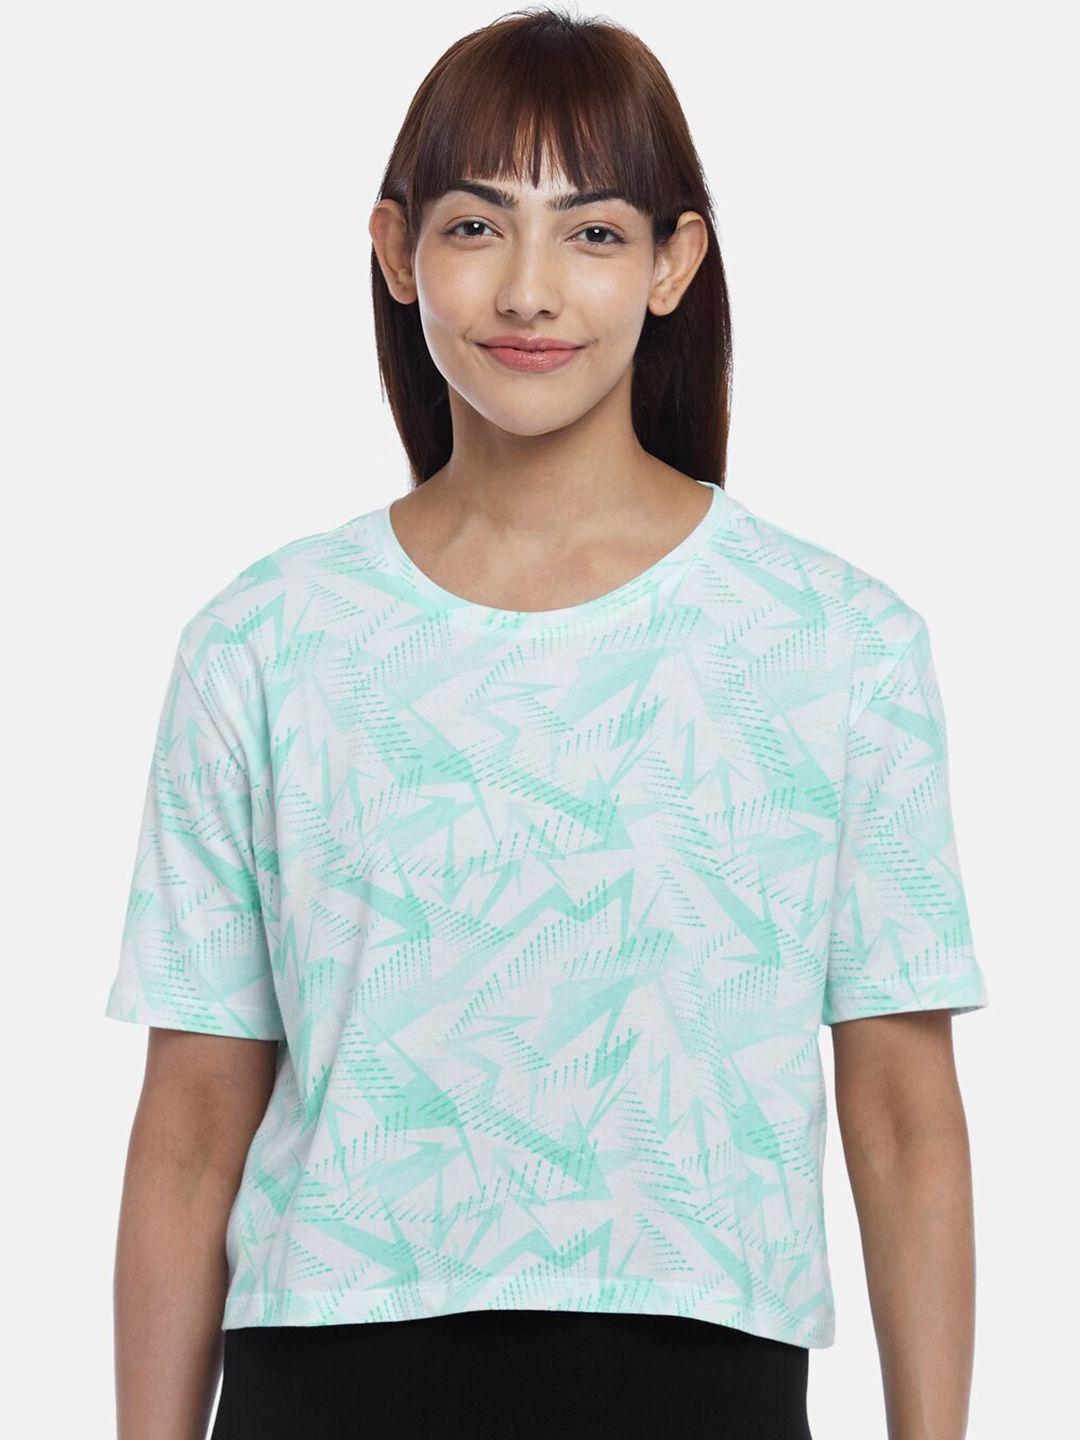 ajile by pantaloons women white and green abstract print short sleeves cotton t shirt